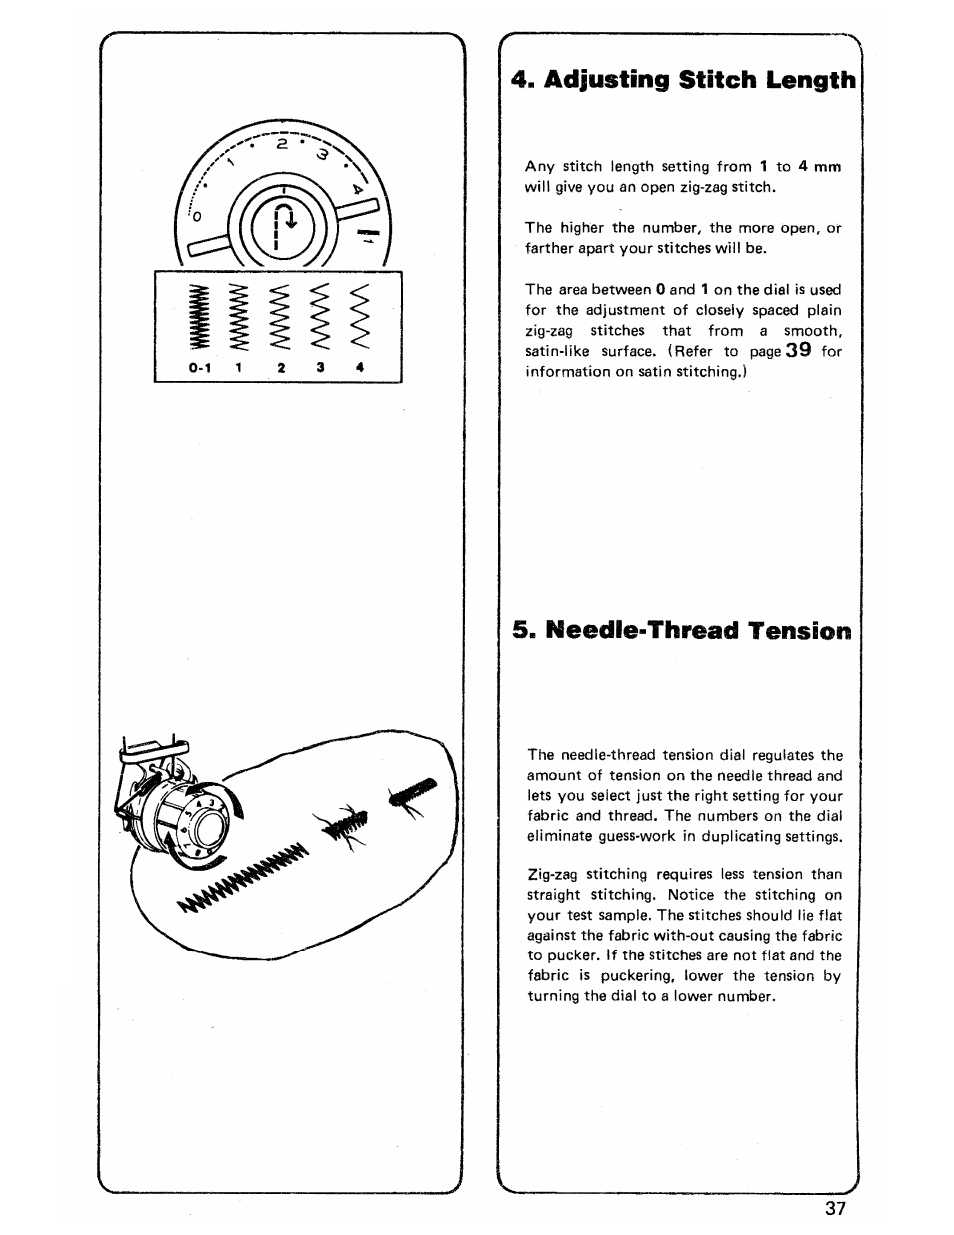 Adjusting stitch length, Needle-thread tension | SINGER 3103 User Manual | Page 39 / 71